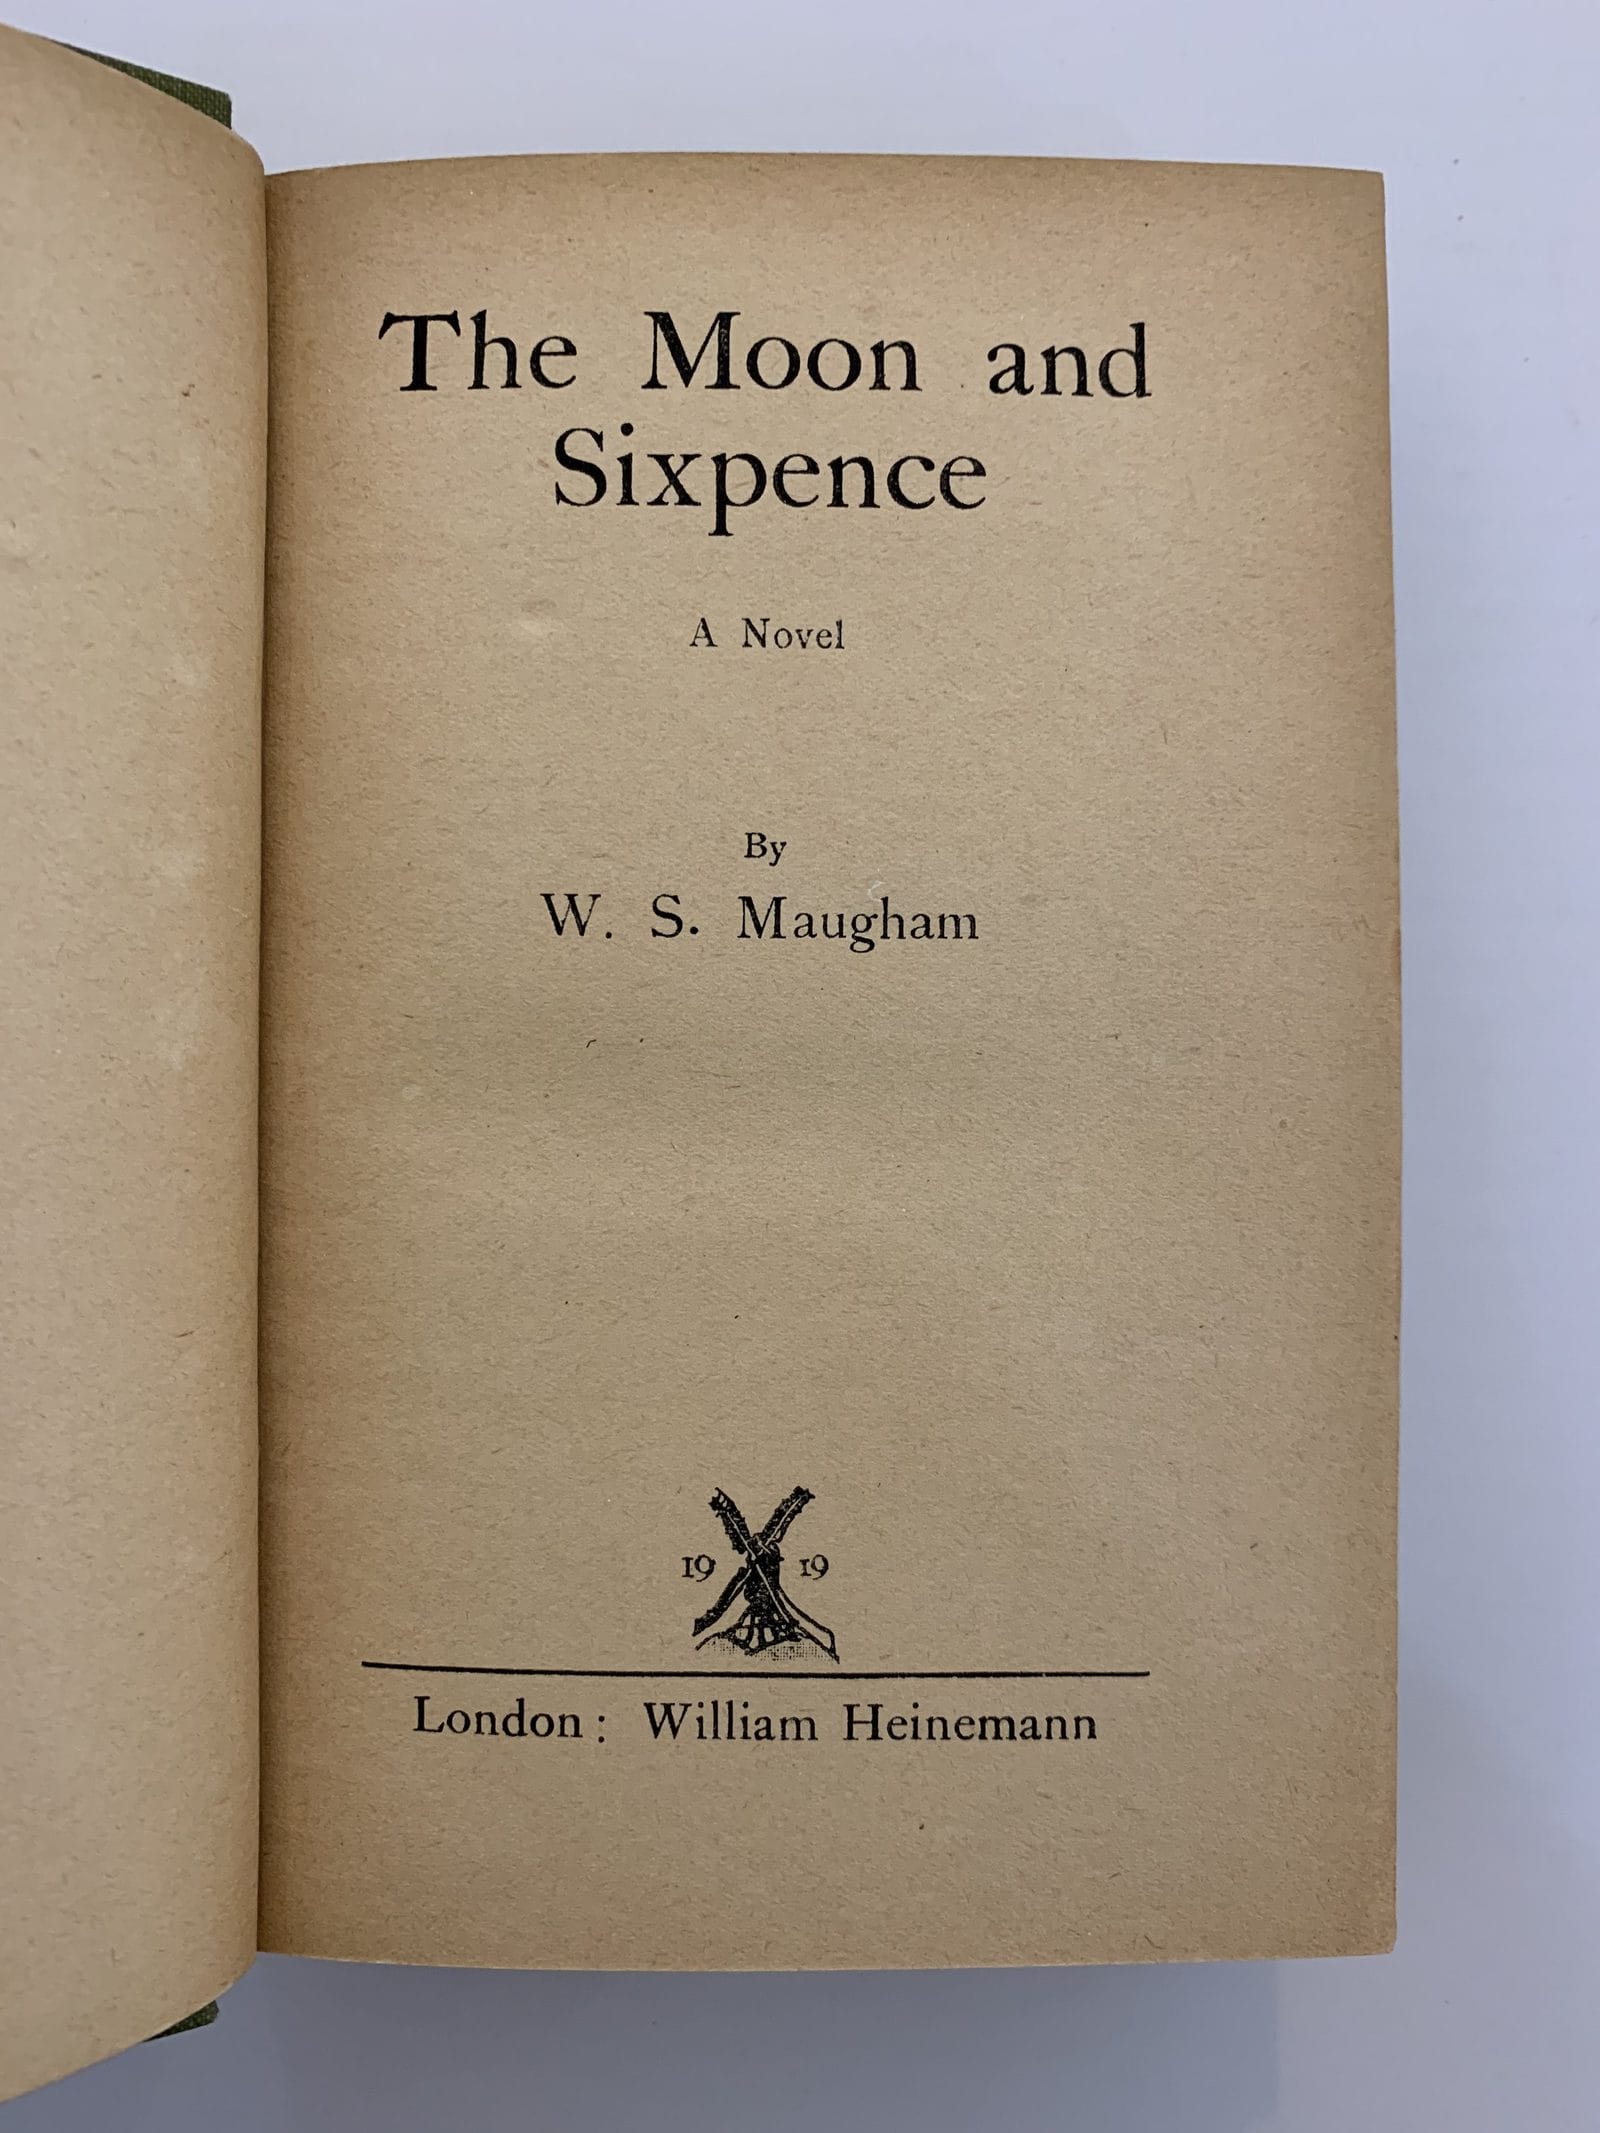 william somerset maugham the moon and sixpence